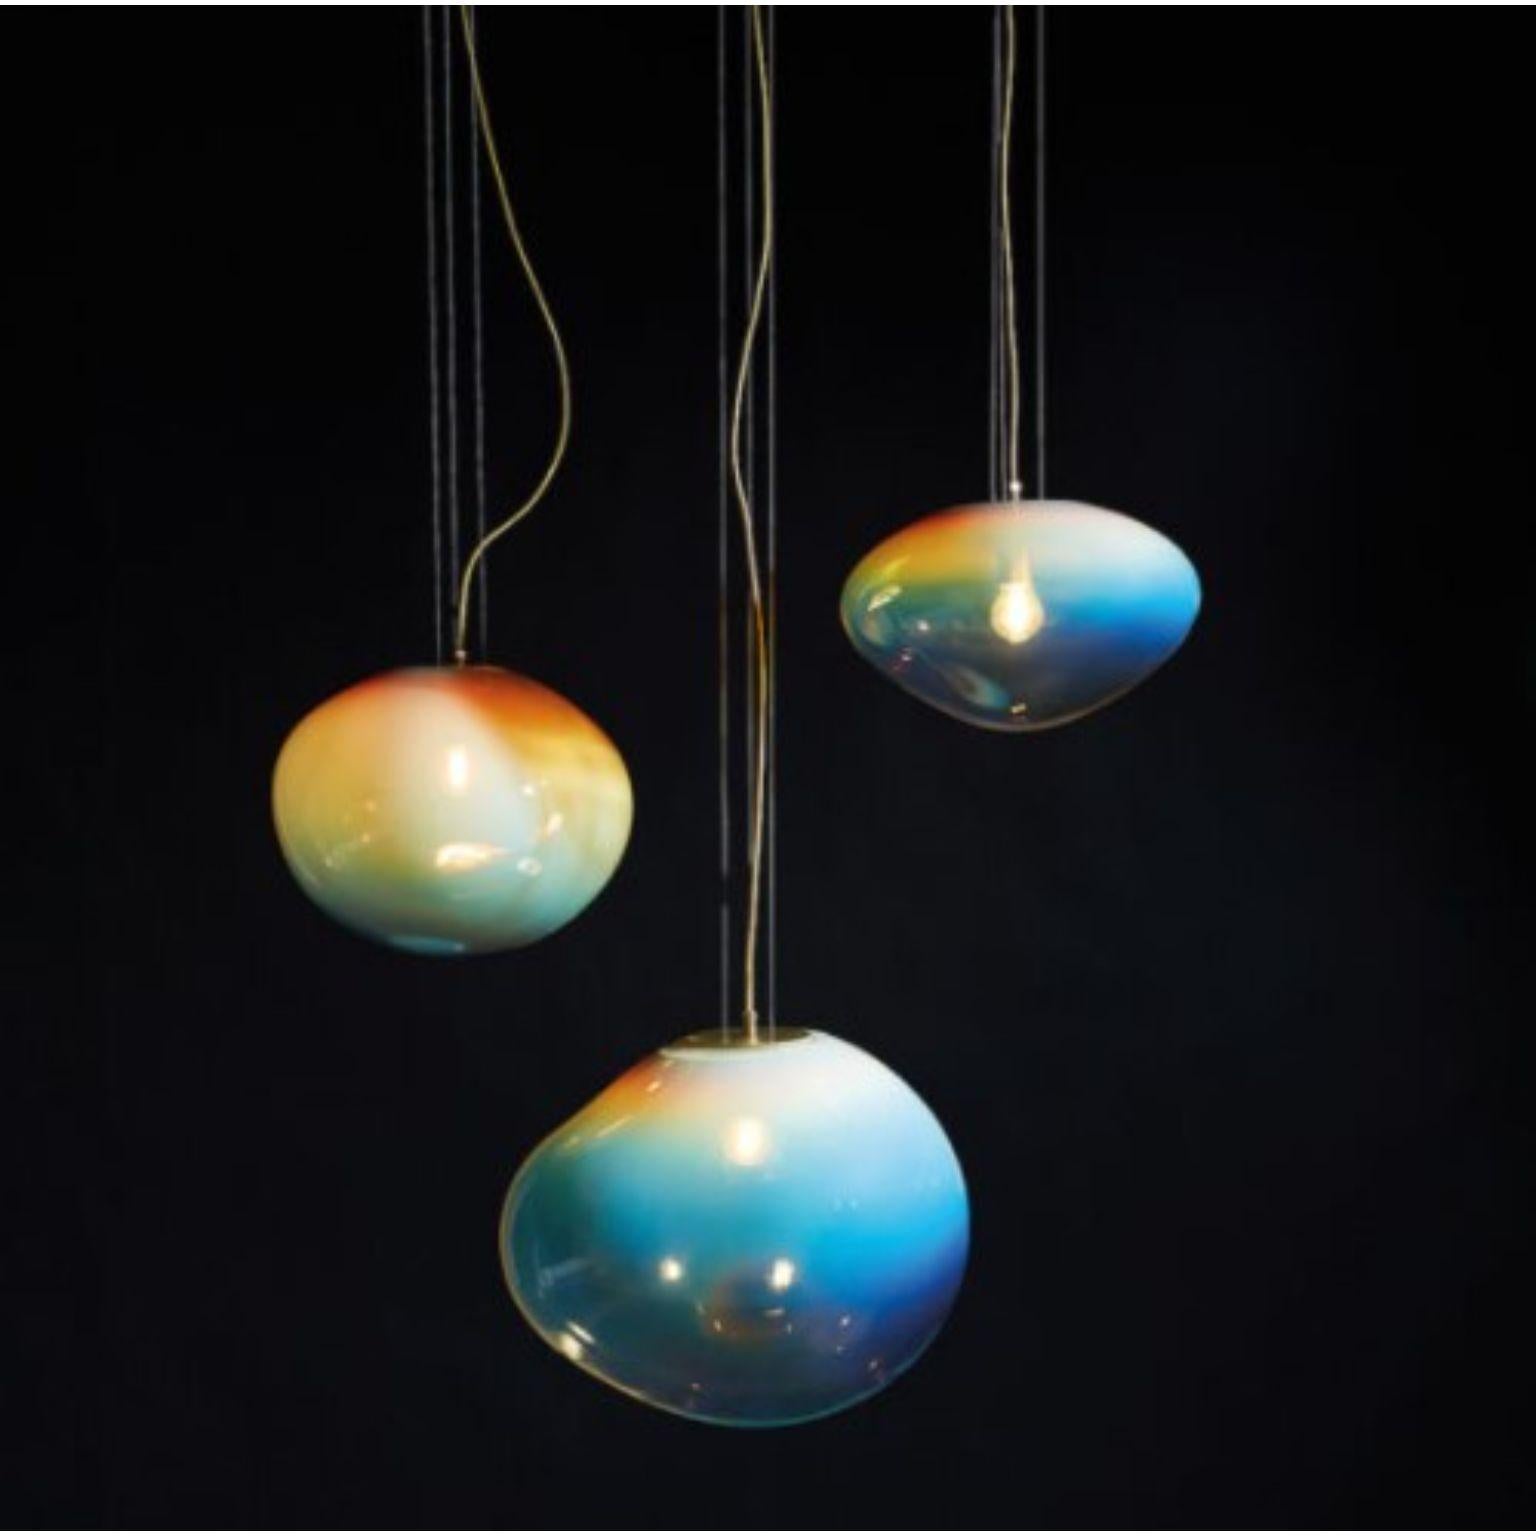 Set of 3 sirius M / L / XL blue pendants by ELOA
No UL listed 
Material: LED Bulb, Glass
Dimensions: D39 x W40 x H32/ D27 x W32 x H20 / D38 x W43 x H38 cm
Also available in different colours and dimensions.

All our lamps can be wired according to